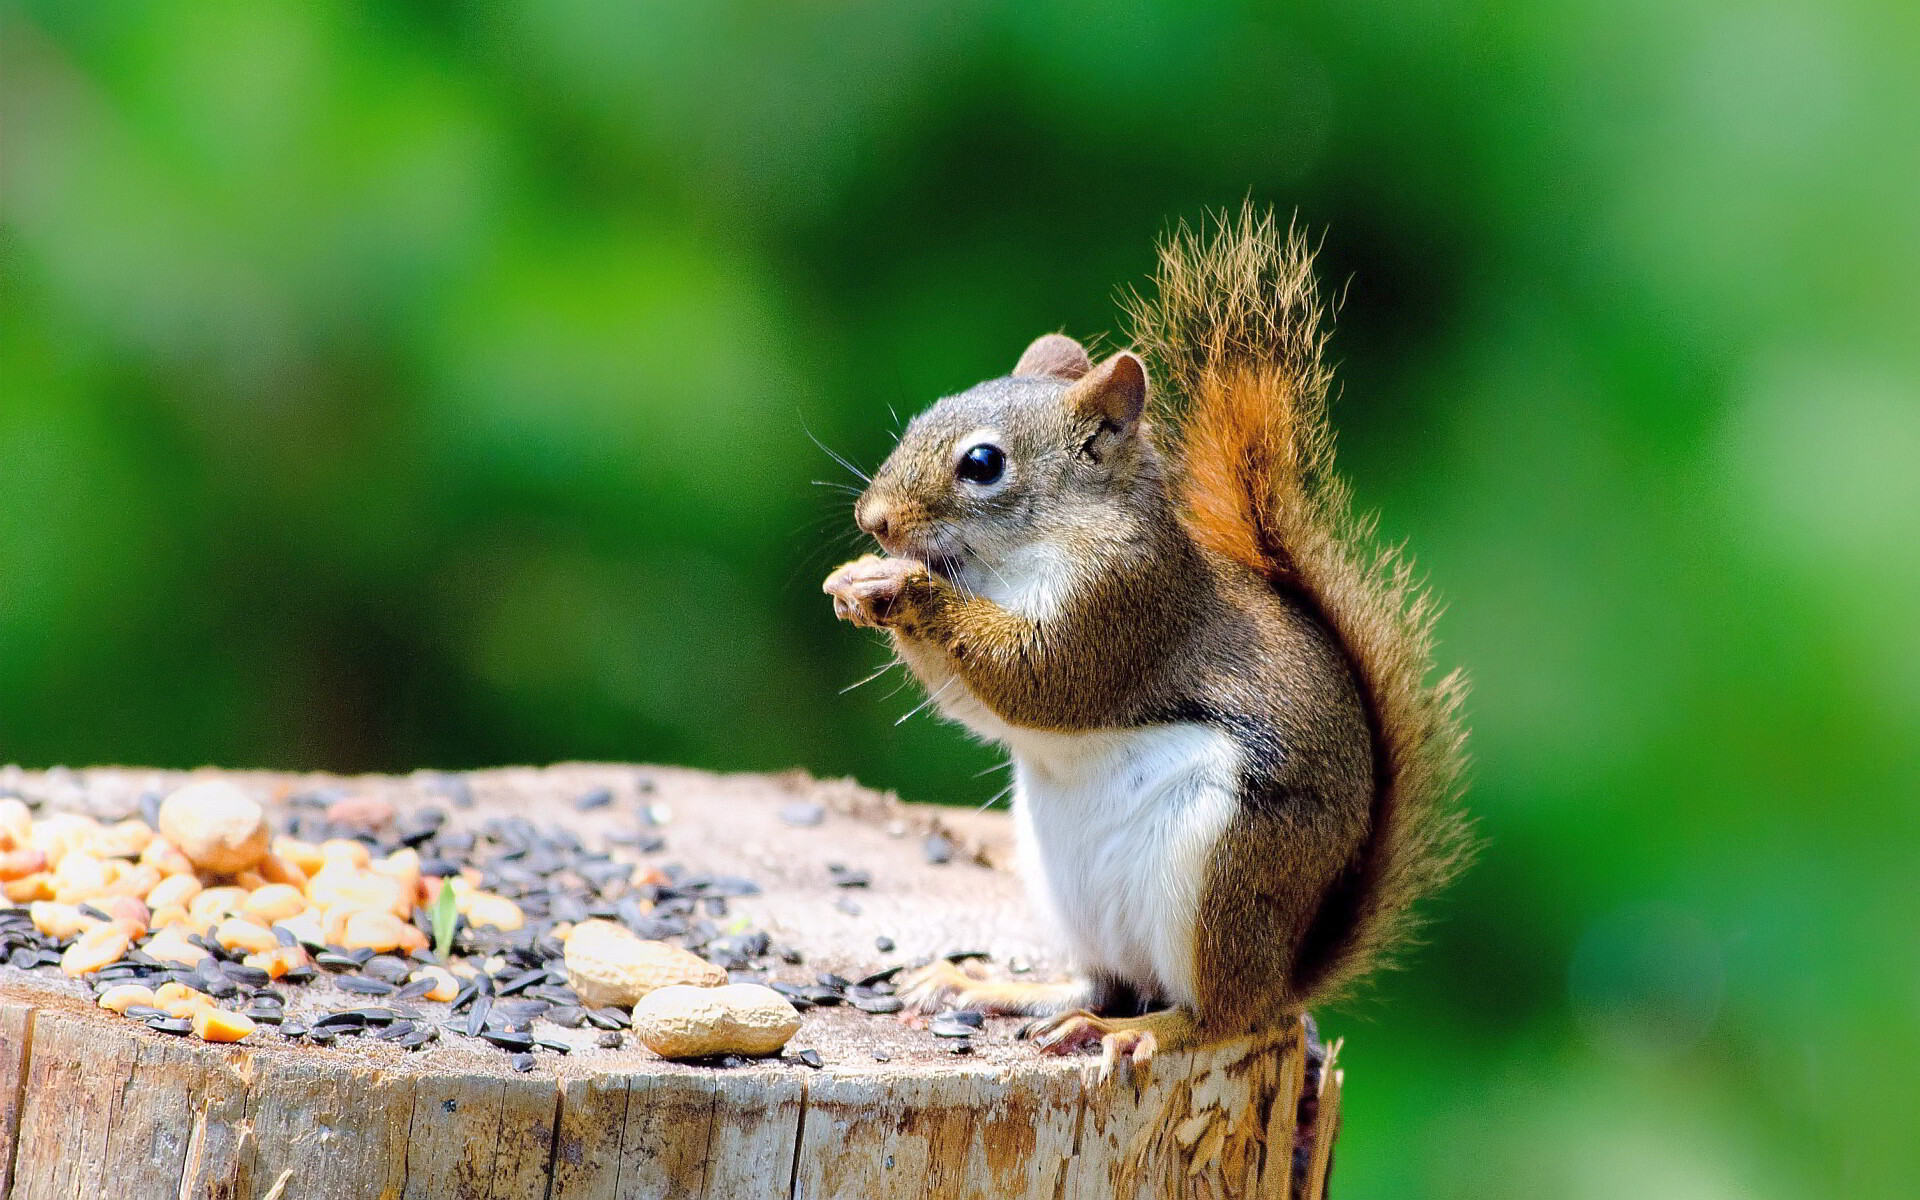 Squirrel: Fluffy-tailed, tree-climbing rodent, The scientific order Rodentia. 1920x1200 HD Wallpaper.